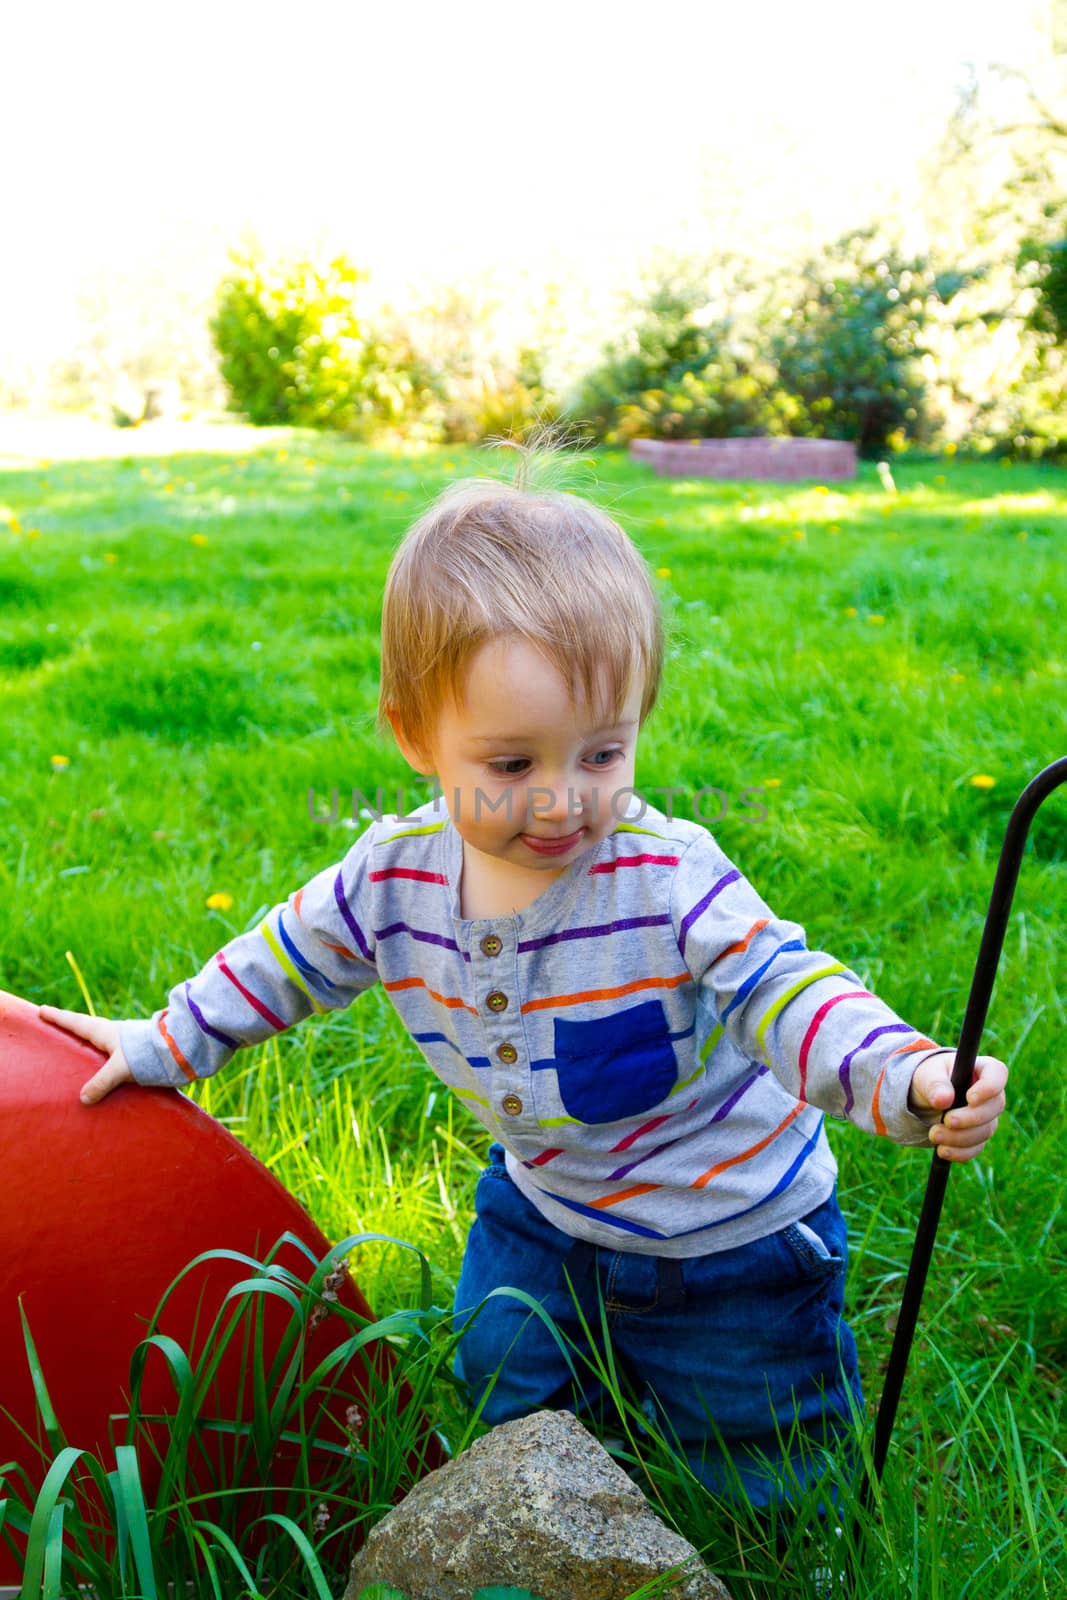 A very curious one year old toddler boy explores his backyard and plays with interesting things among the grass and plants.